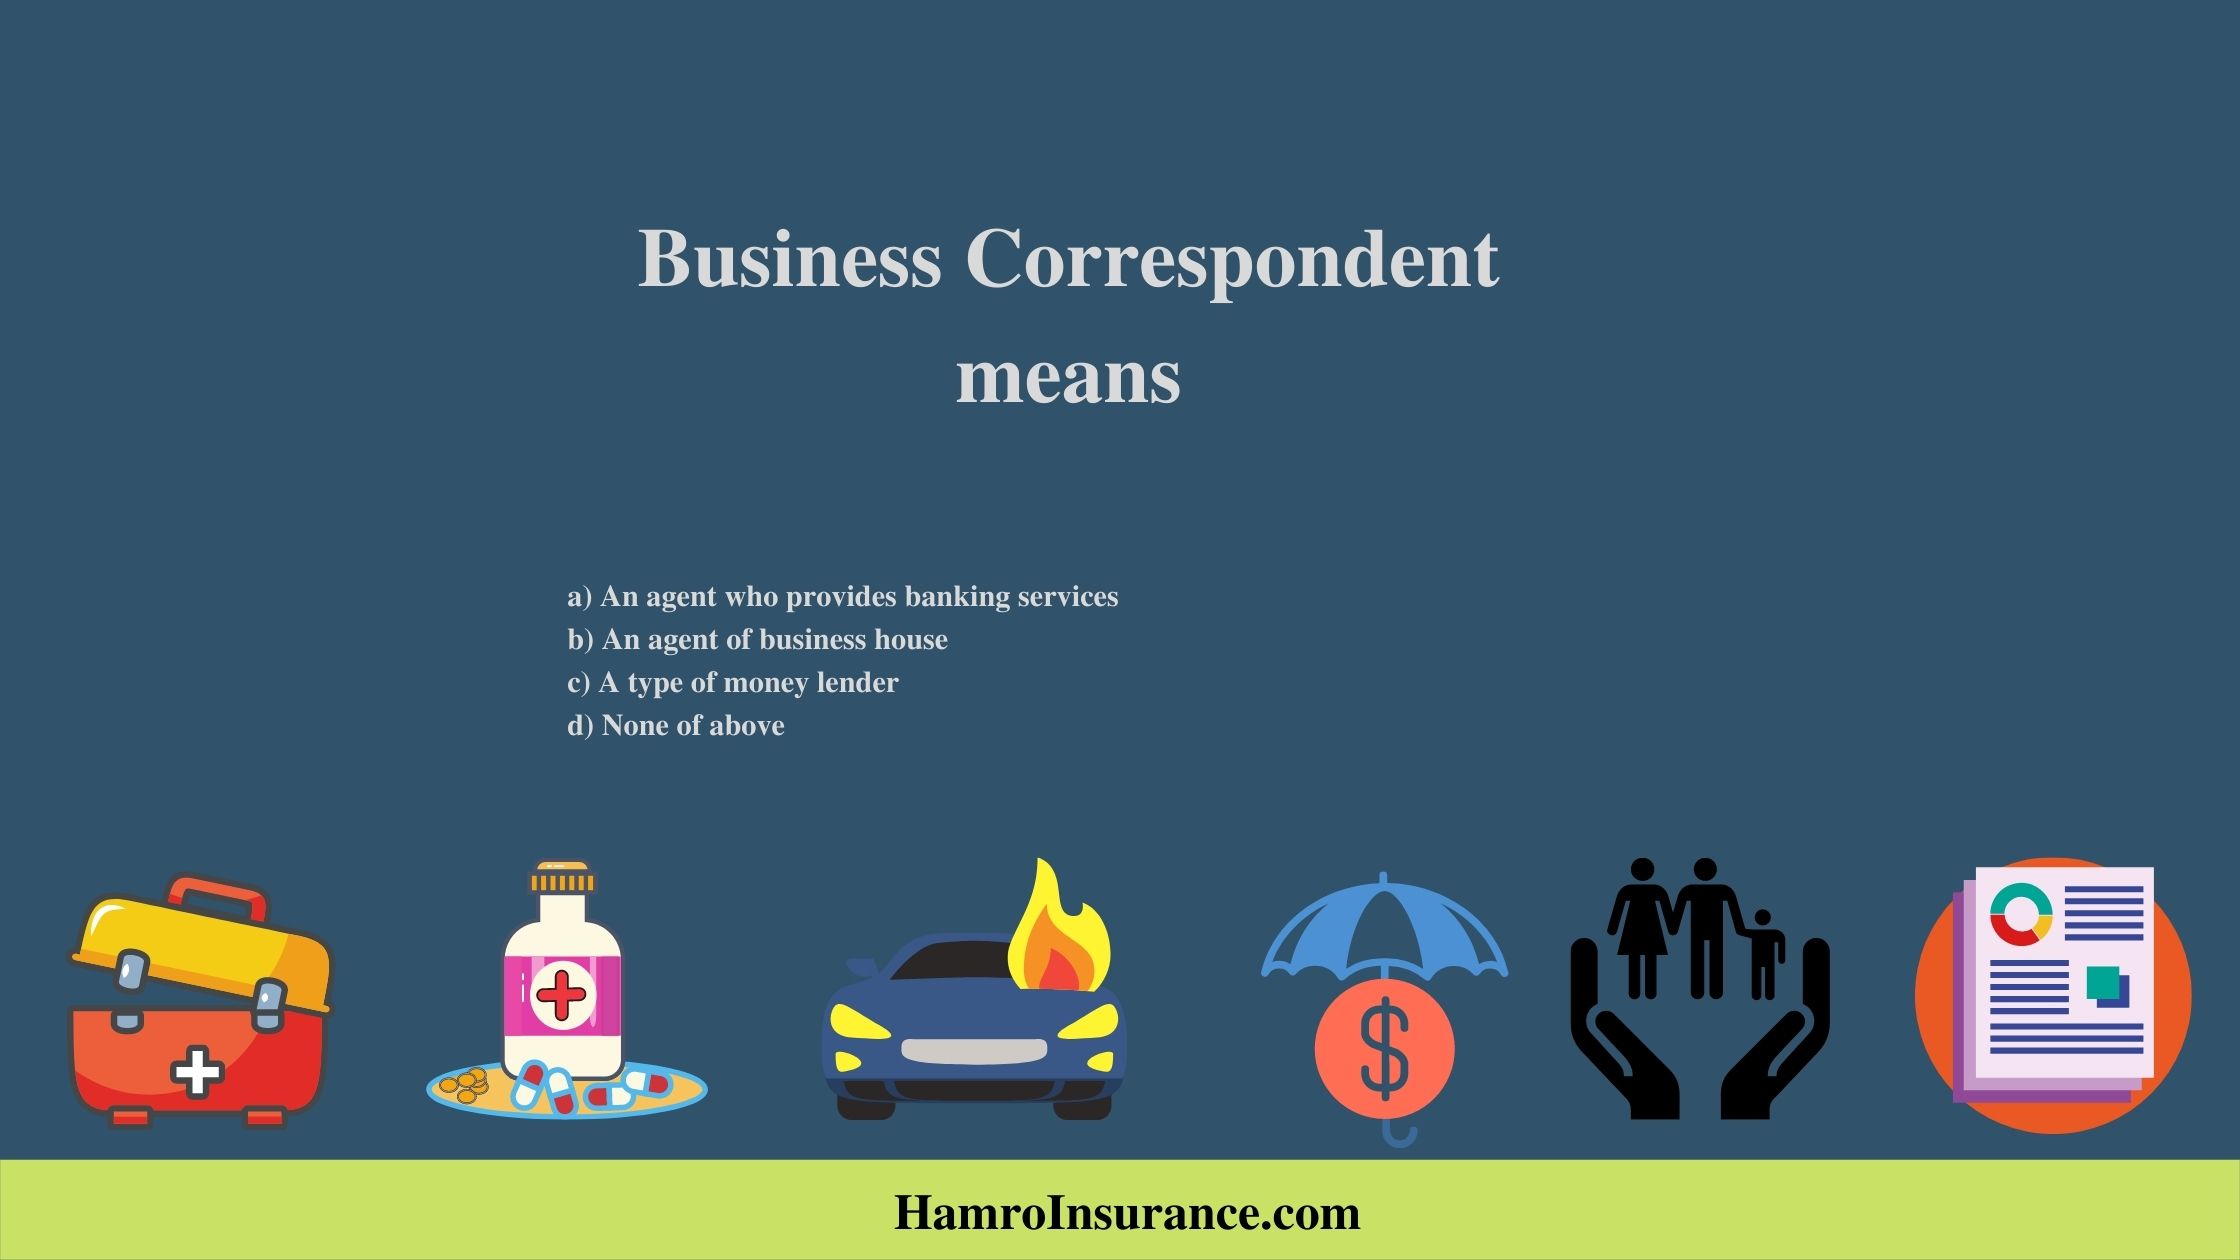 Business Correspondent means